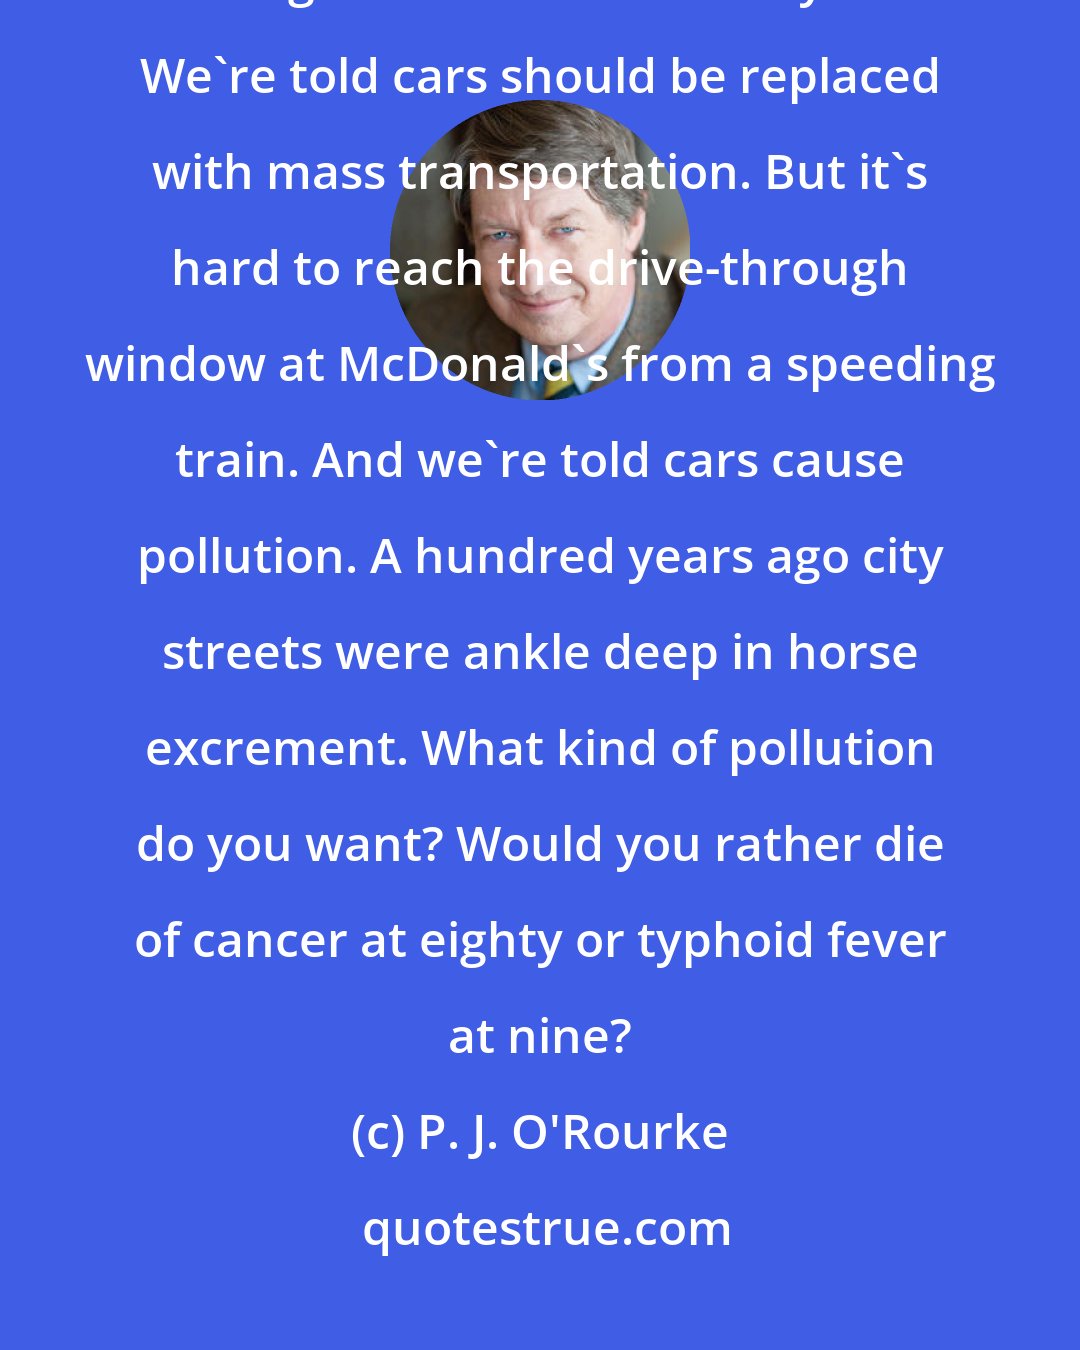 P. J. O'Rourke: We're told cars are wasteful. Wasteful of what? Oil did a lot of good sitting in the ground for millions of years. We're told cars should be replaced with mass transportation. But it's hard to reach the drive-through window at McDonald's from a speeding train. And we're told cars cause pollution. A hundred years ago city streets were ankle deep in horse excrement. What kind of pollution do you want? Would you rather die of cancer at eighty or typhoid fever at nine?